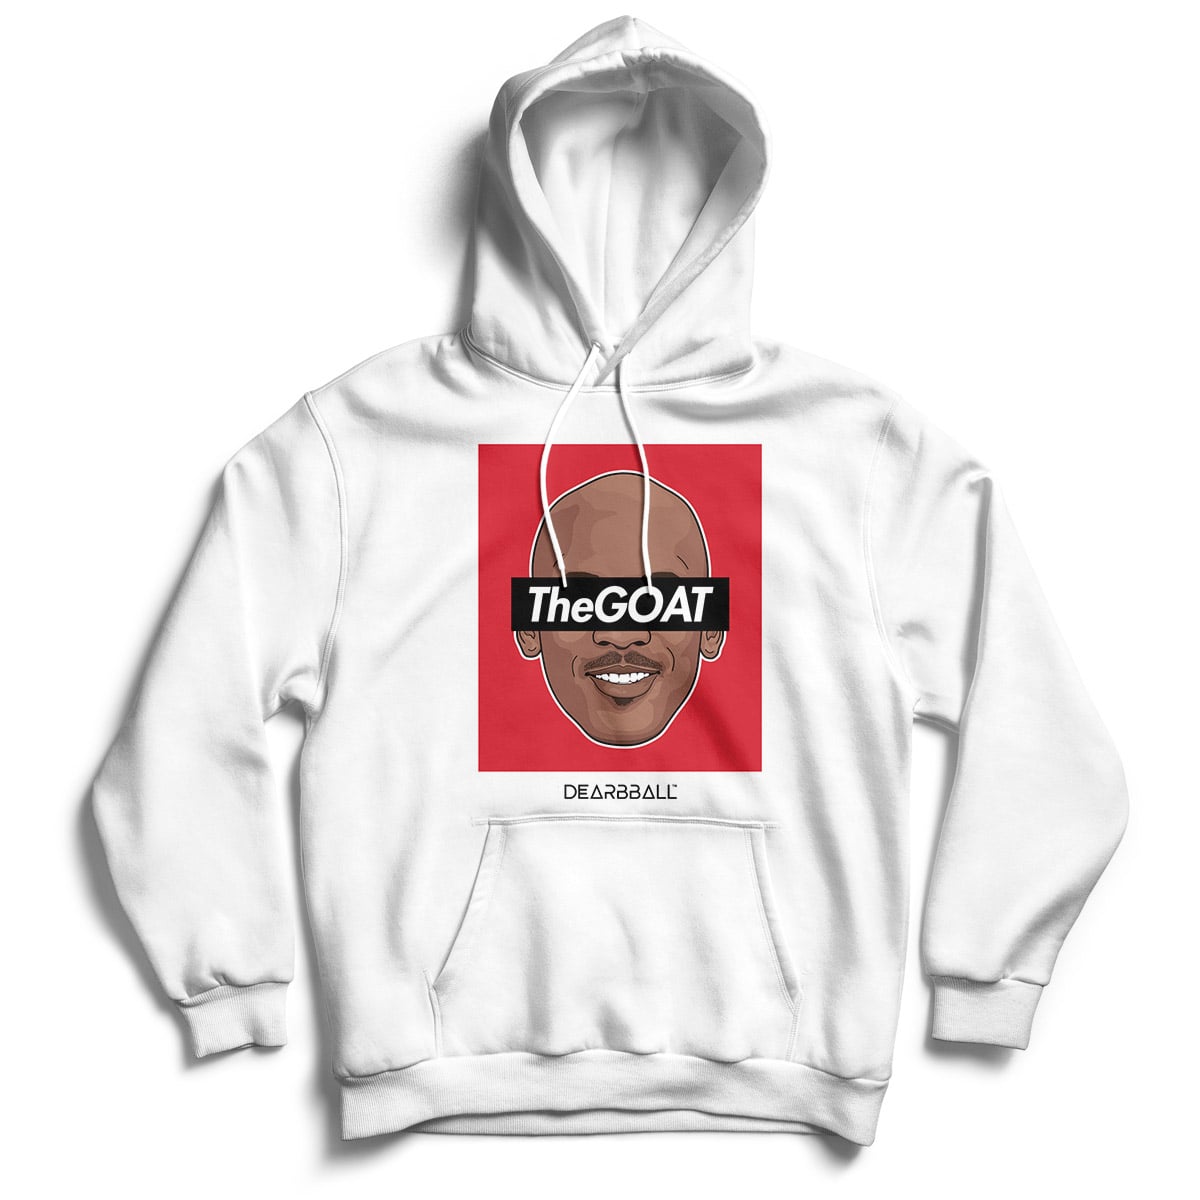 [ENFANT] DearBBall Sweat à Capuche - TheGOAT Red Edition